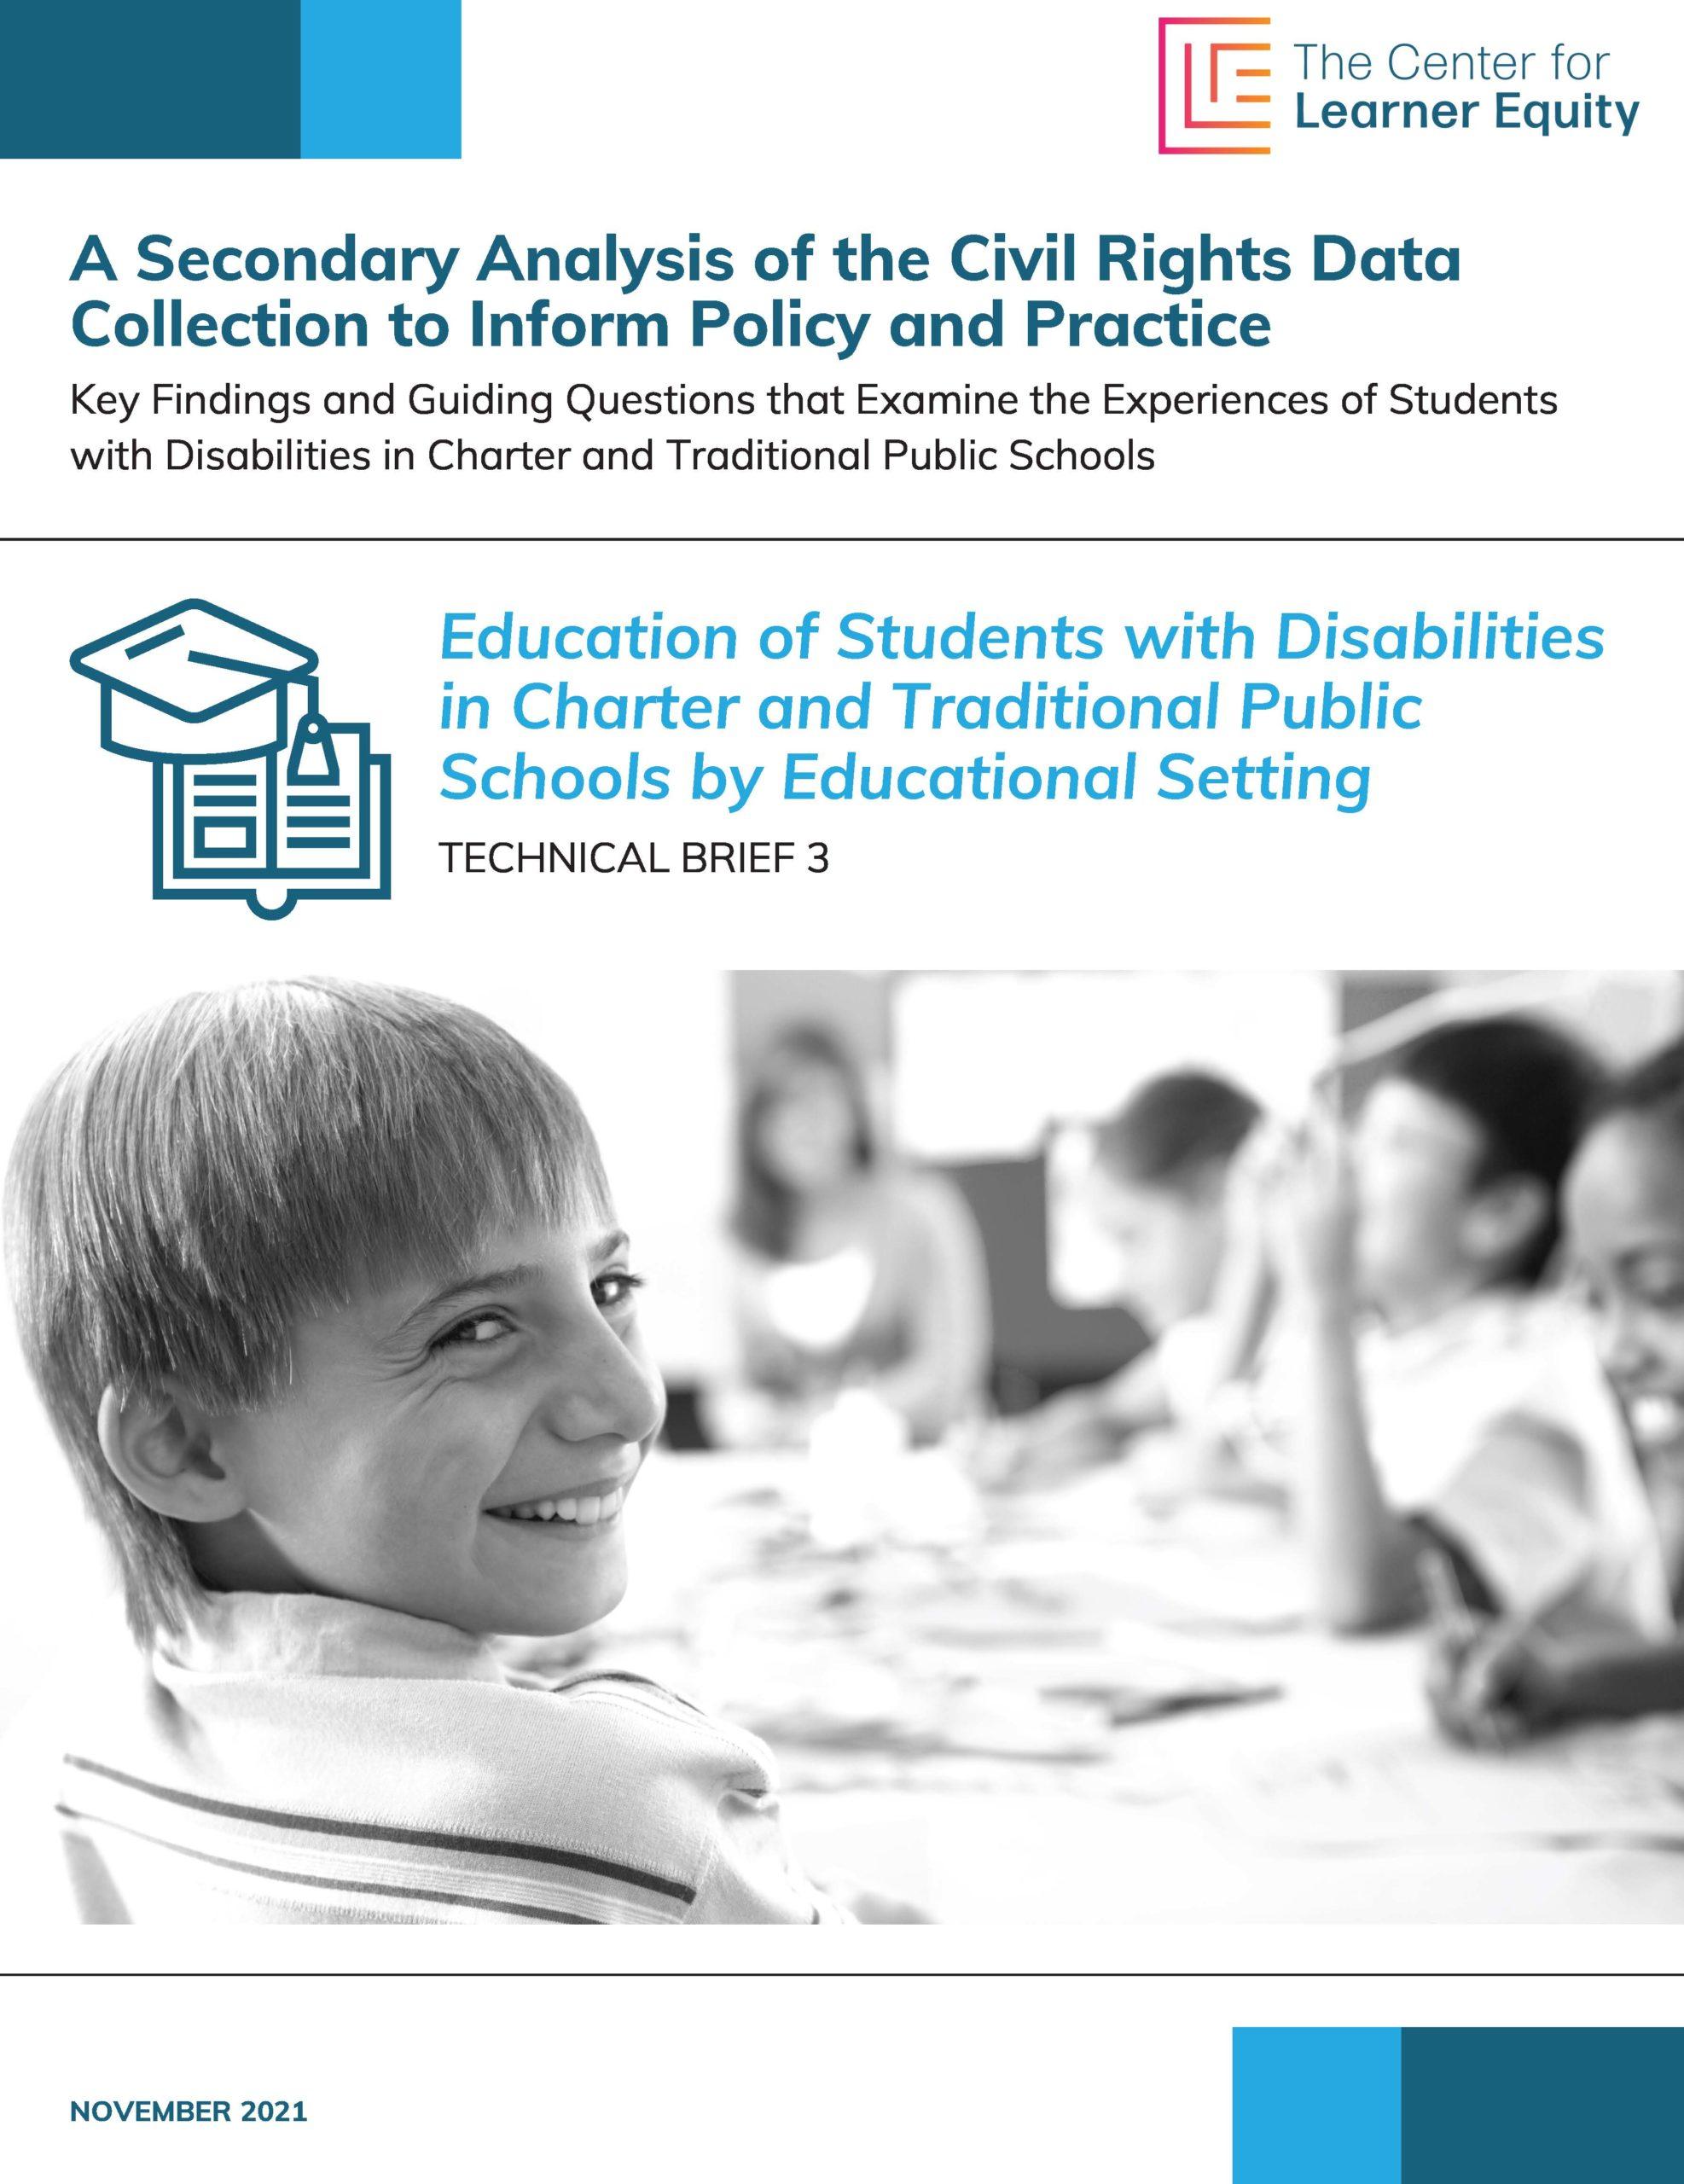 Education of Students with Disabilities in Charter and Traditional Schools Technical Brief Cover